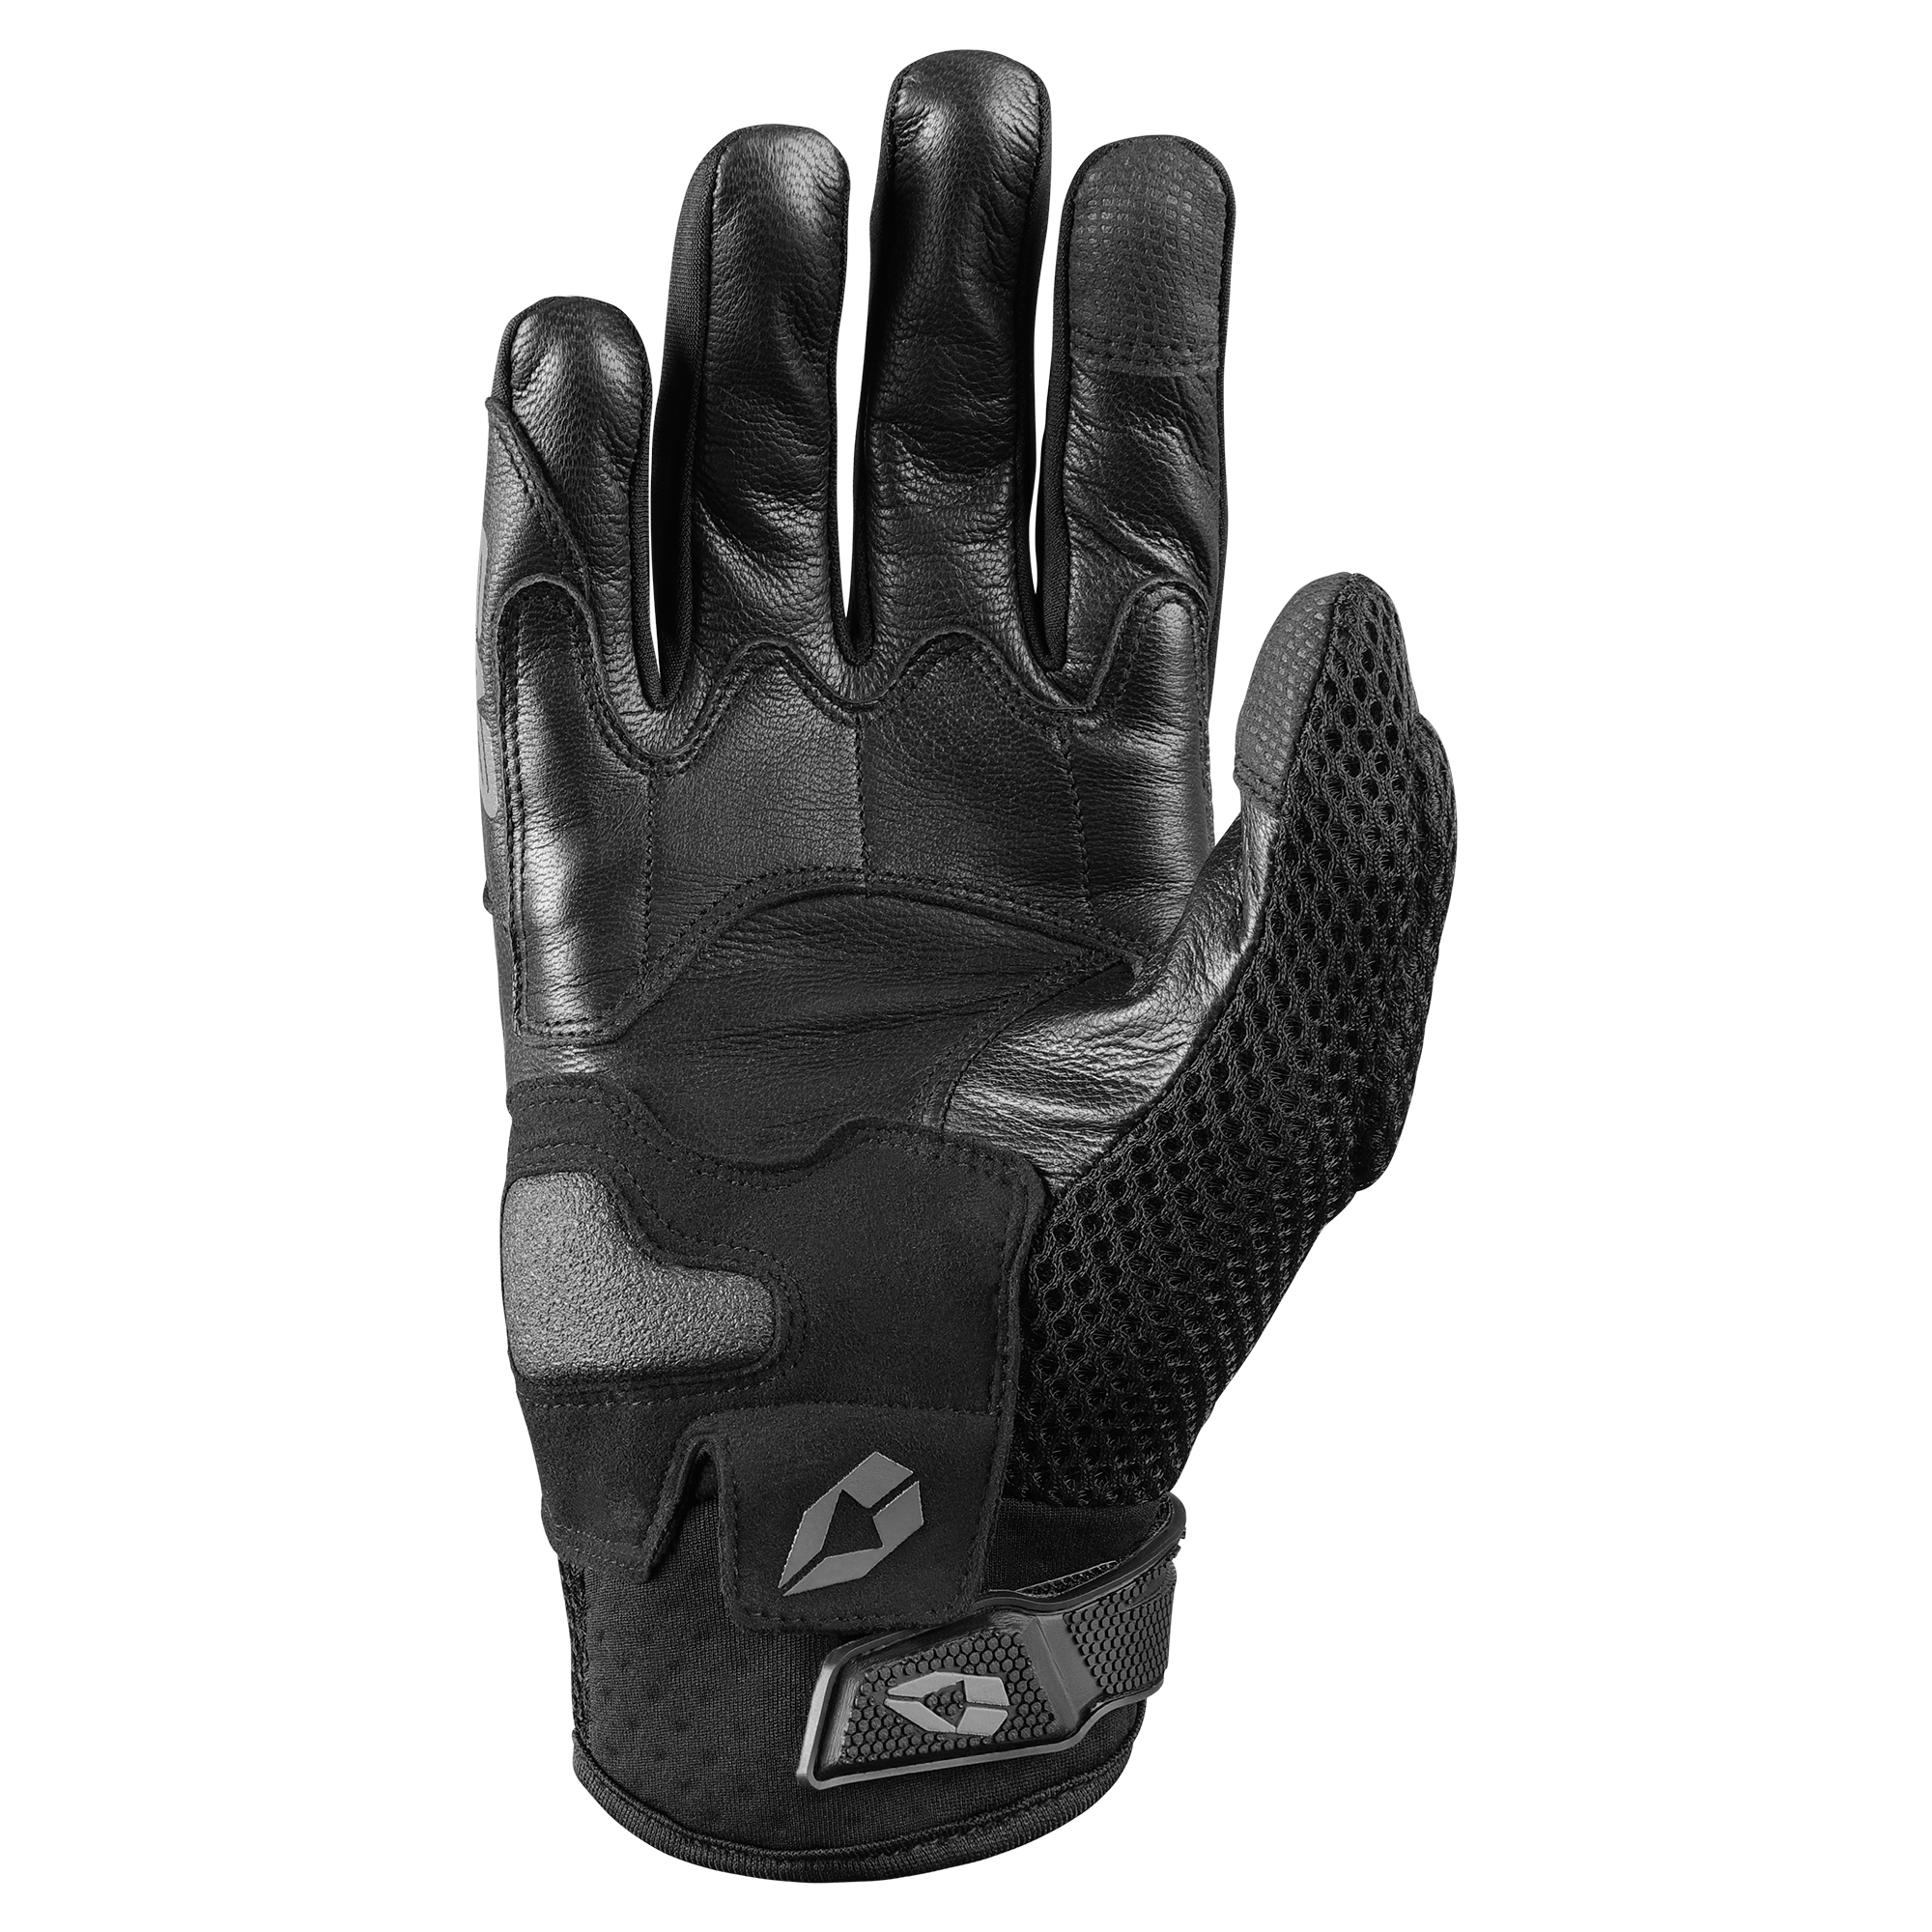 Assen Riding Gloves Black 2X-Large - Click Image to Close